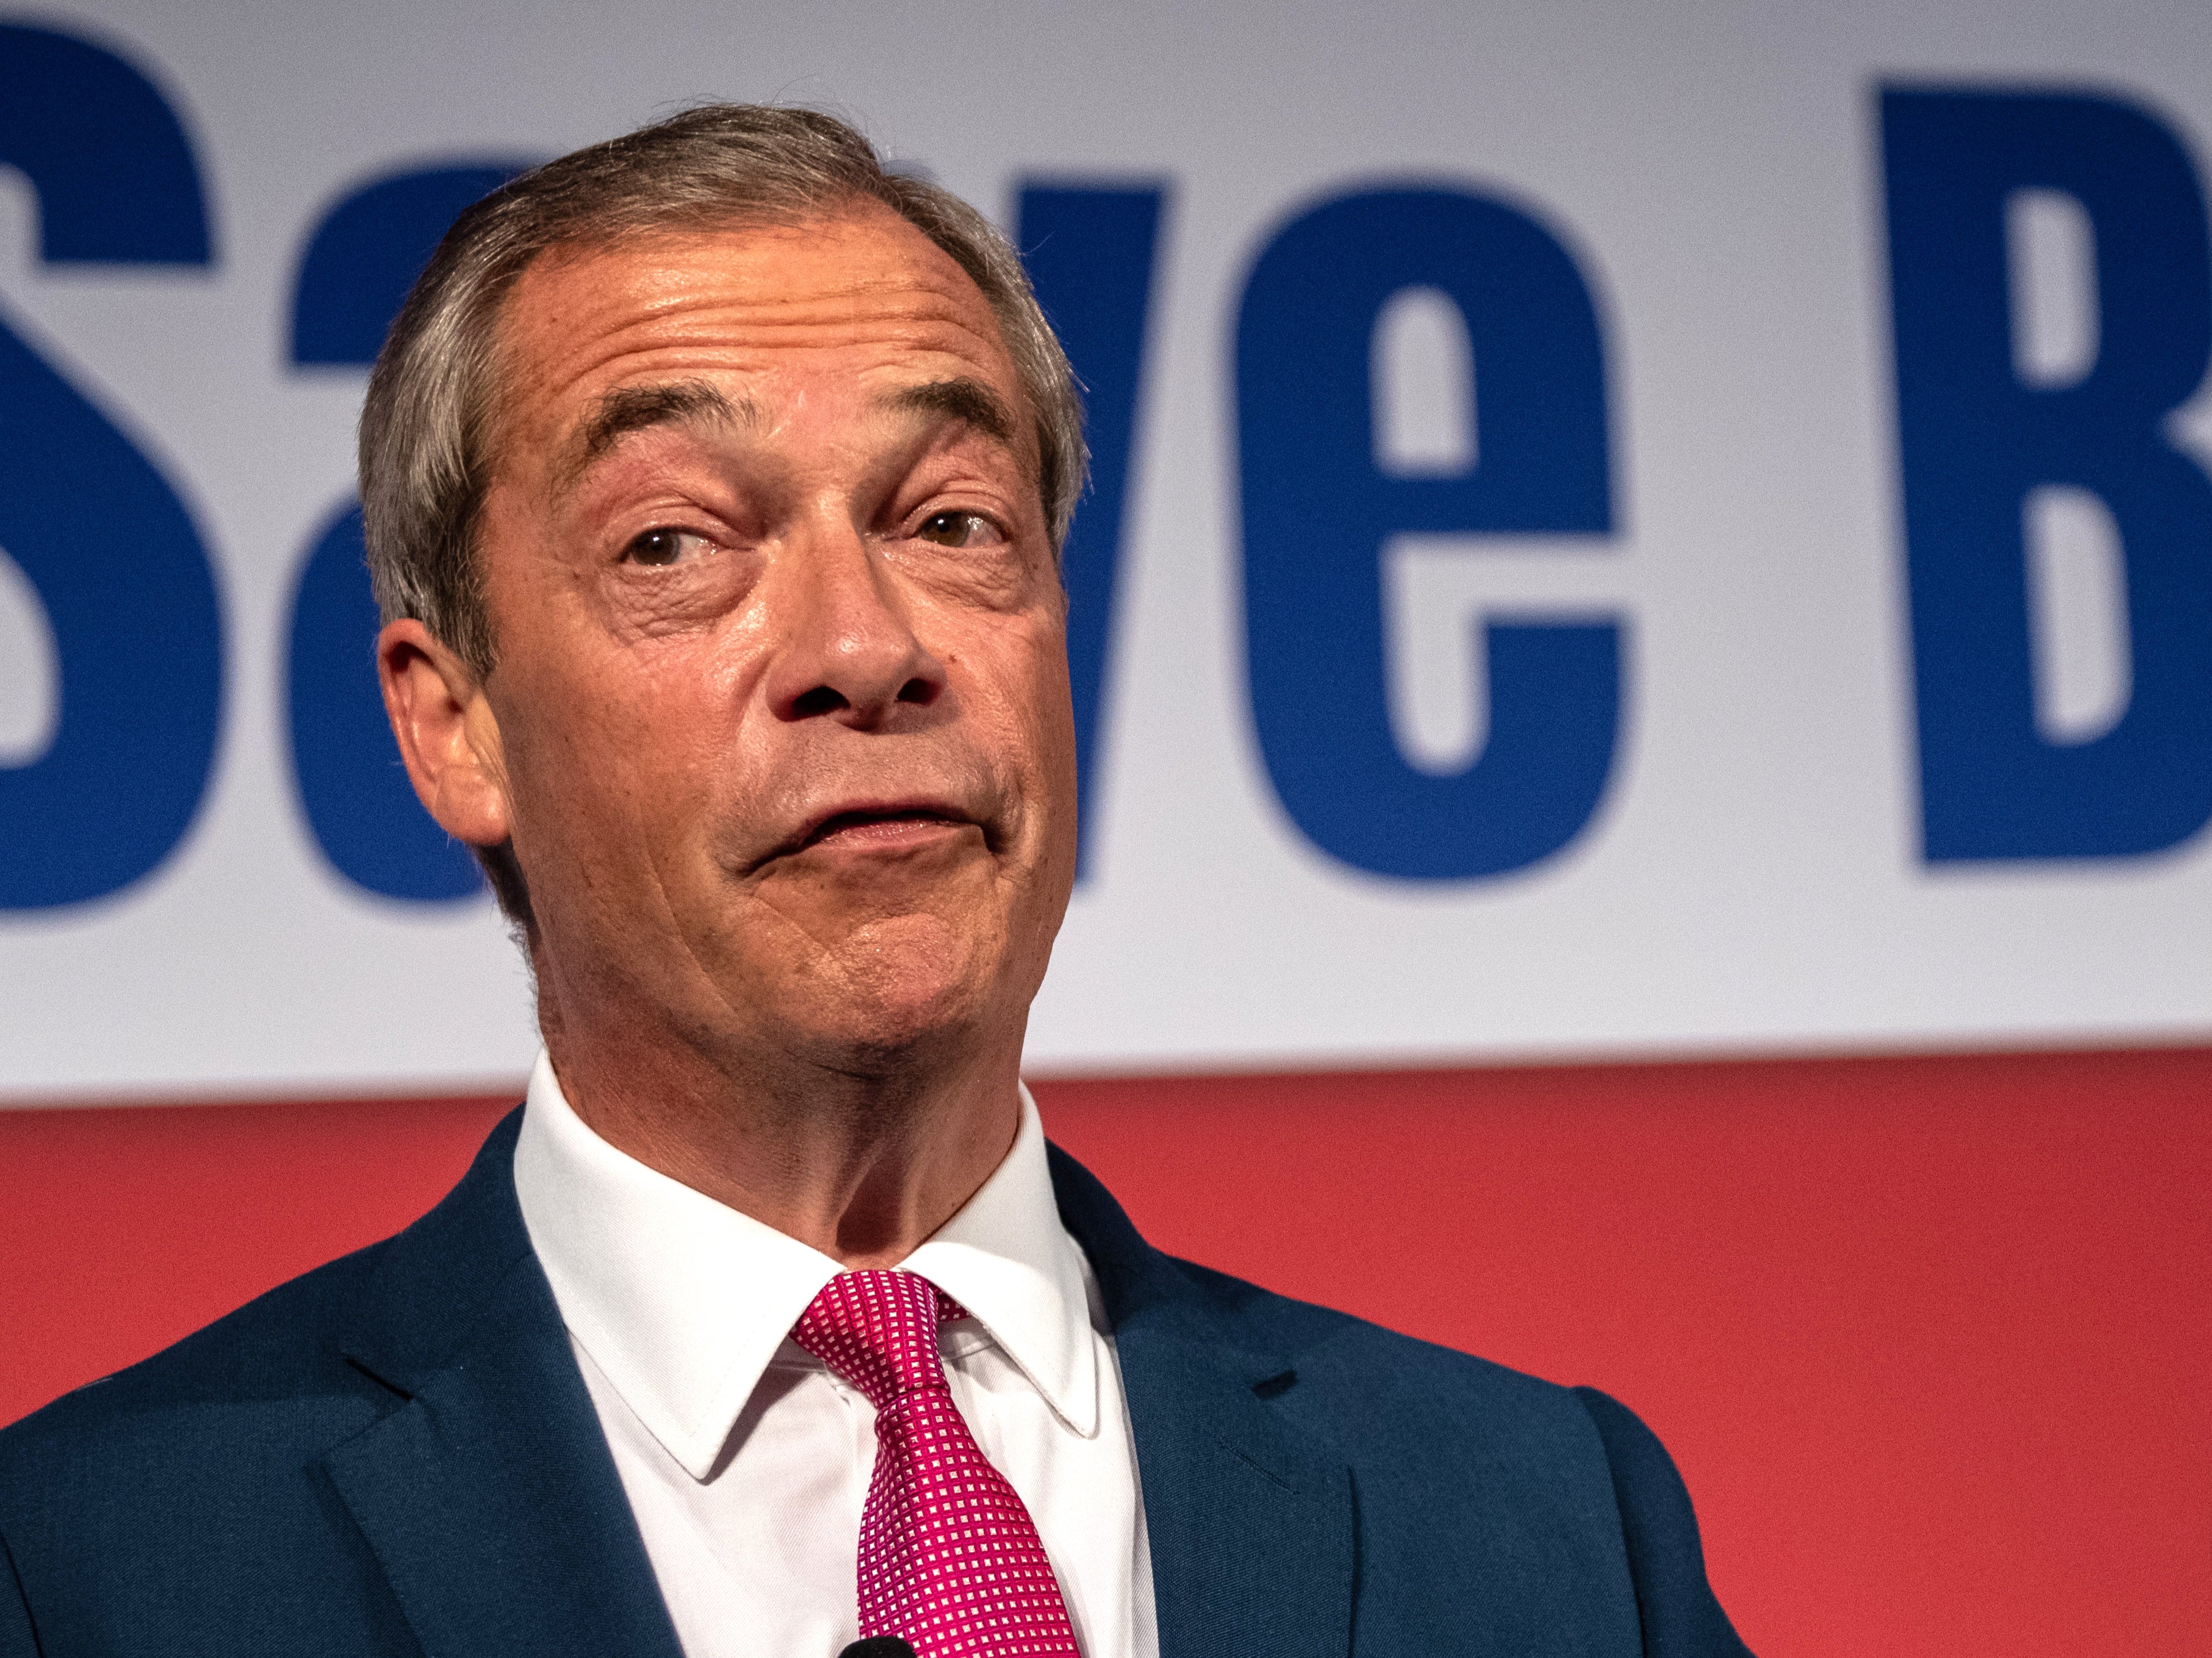 Farage says Labour will win regardless of how Reform squeezes the Tories